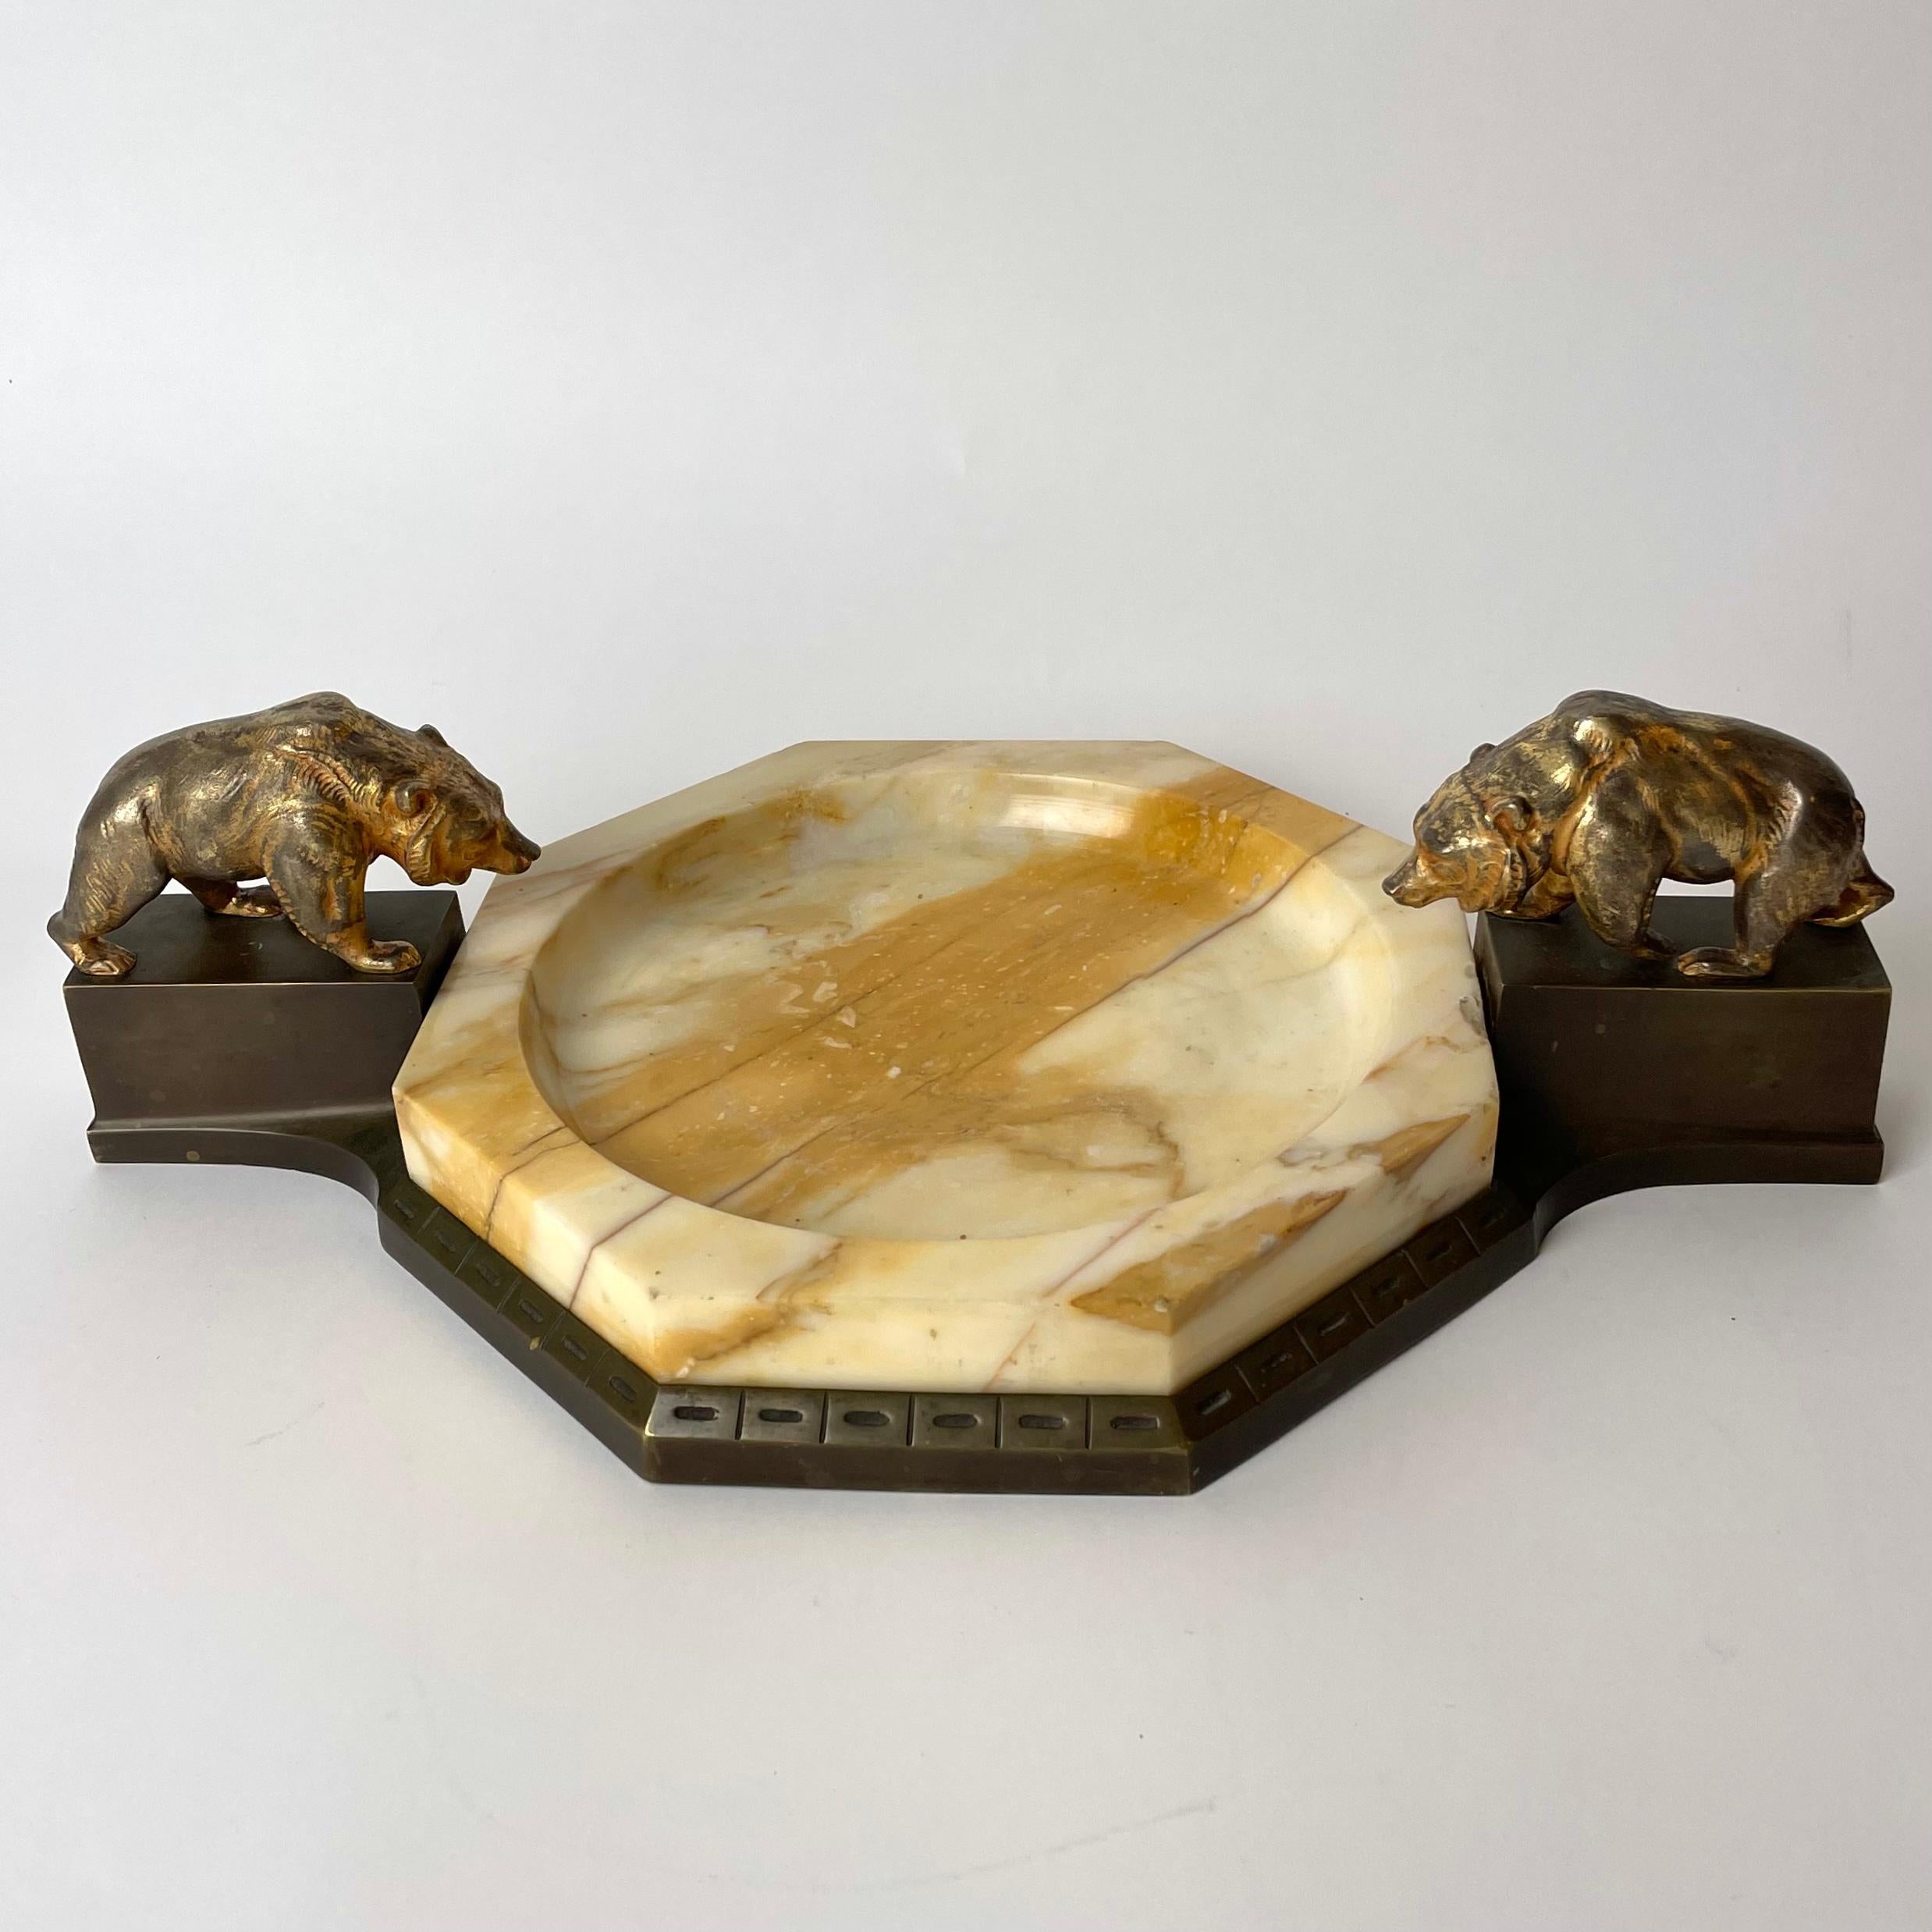 European Cool Dish in Marble and Bronze, Art Deco, 1920s For Sale